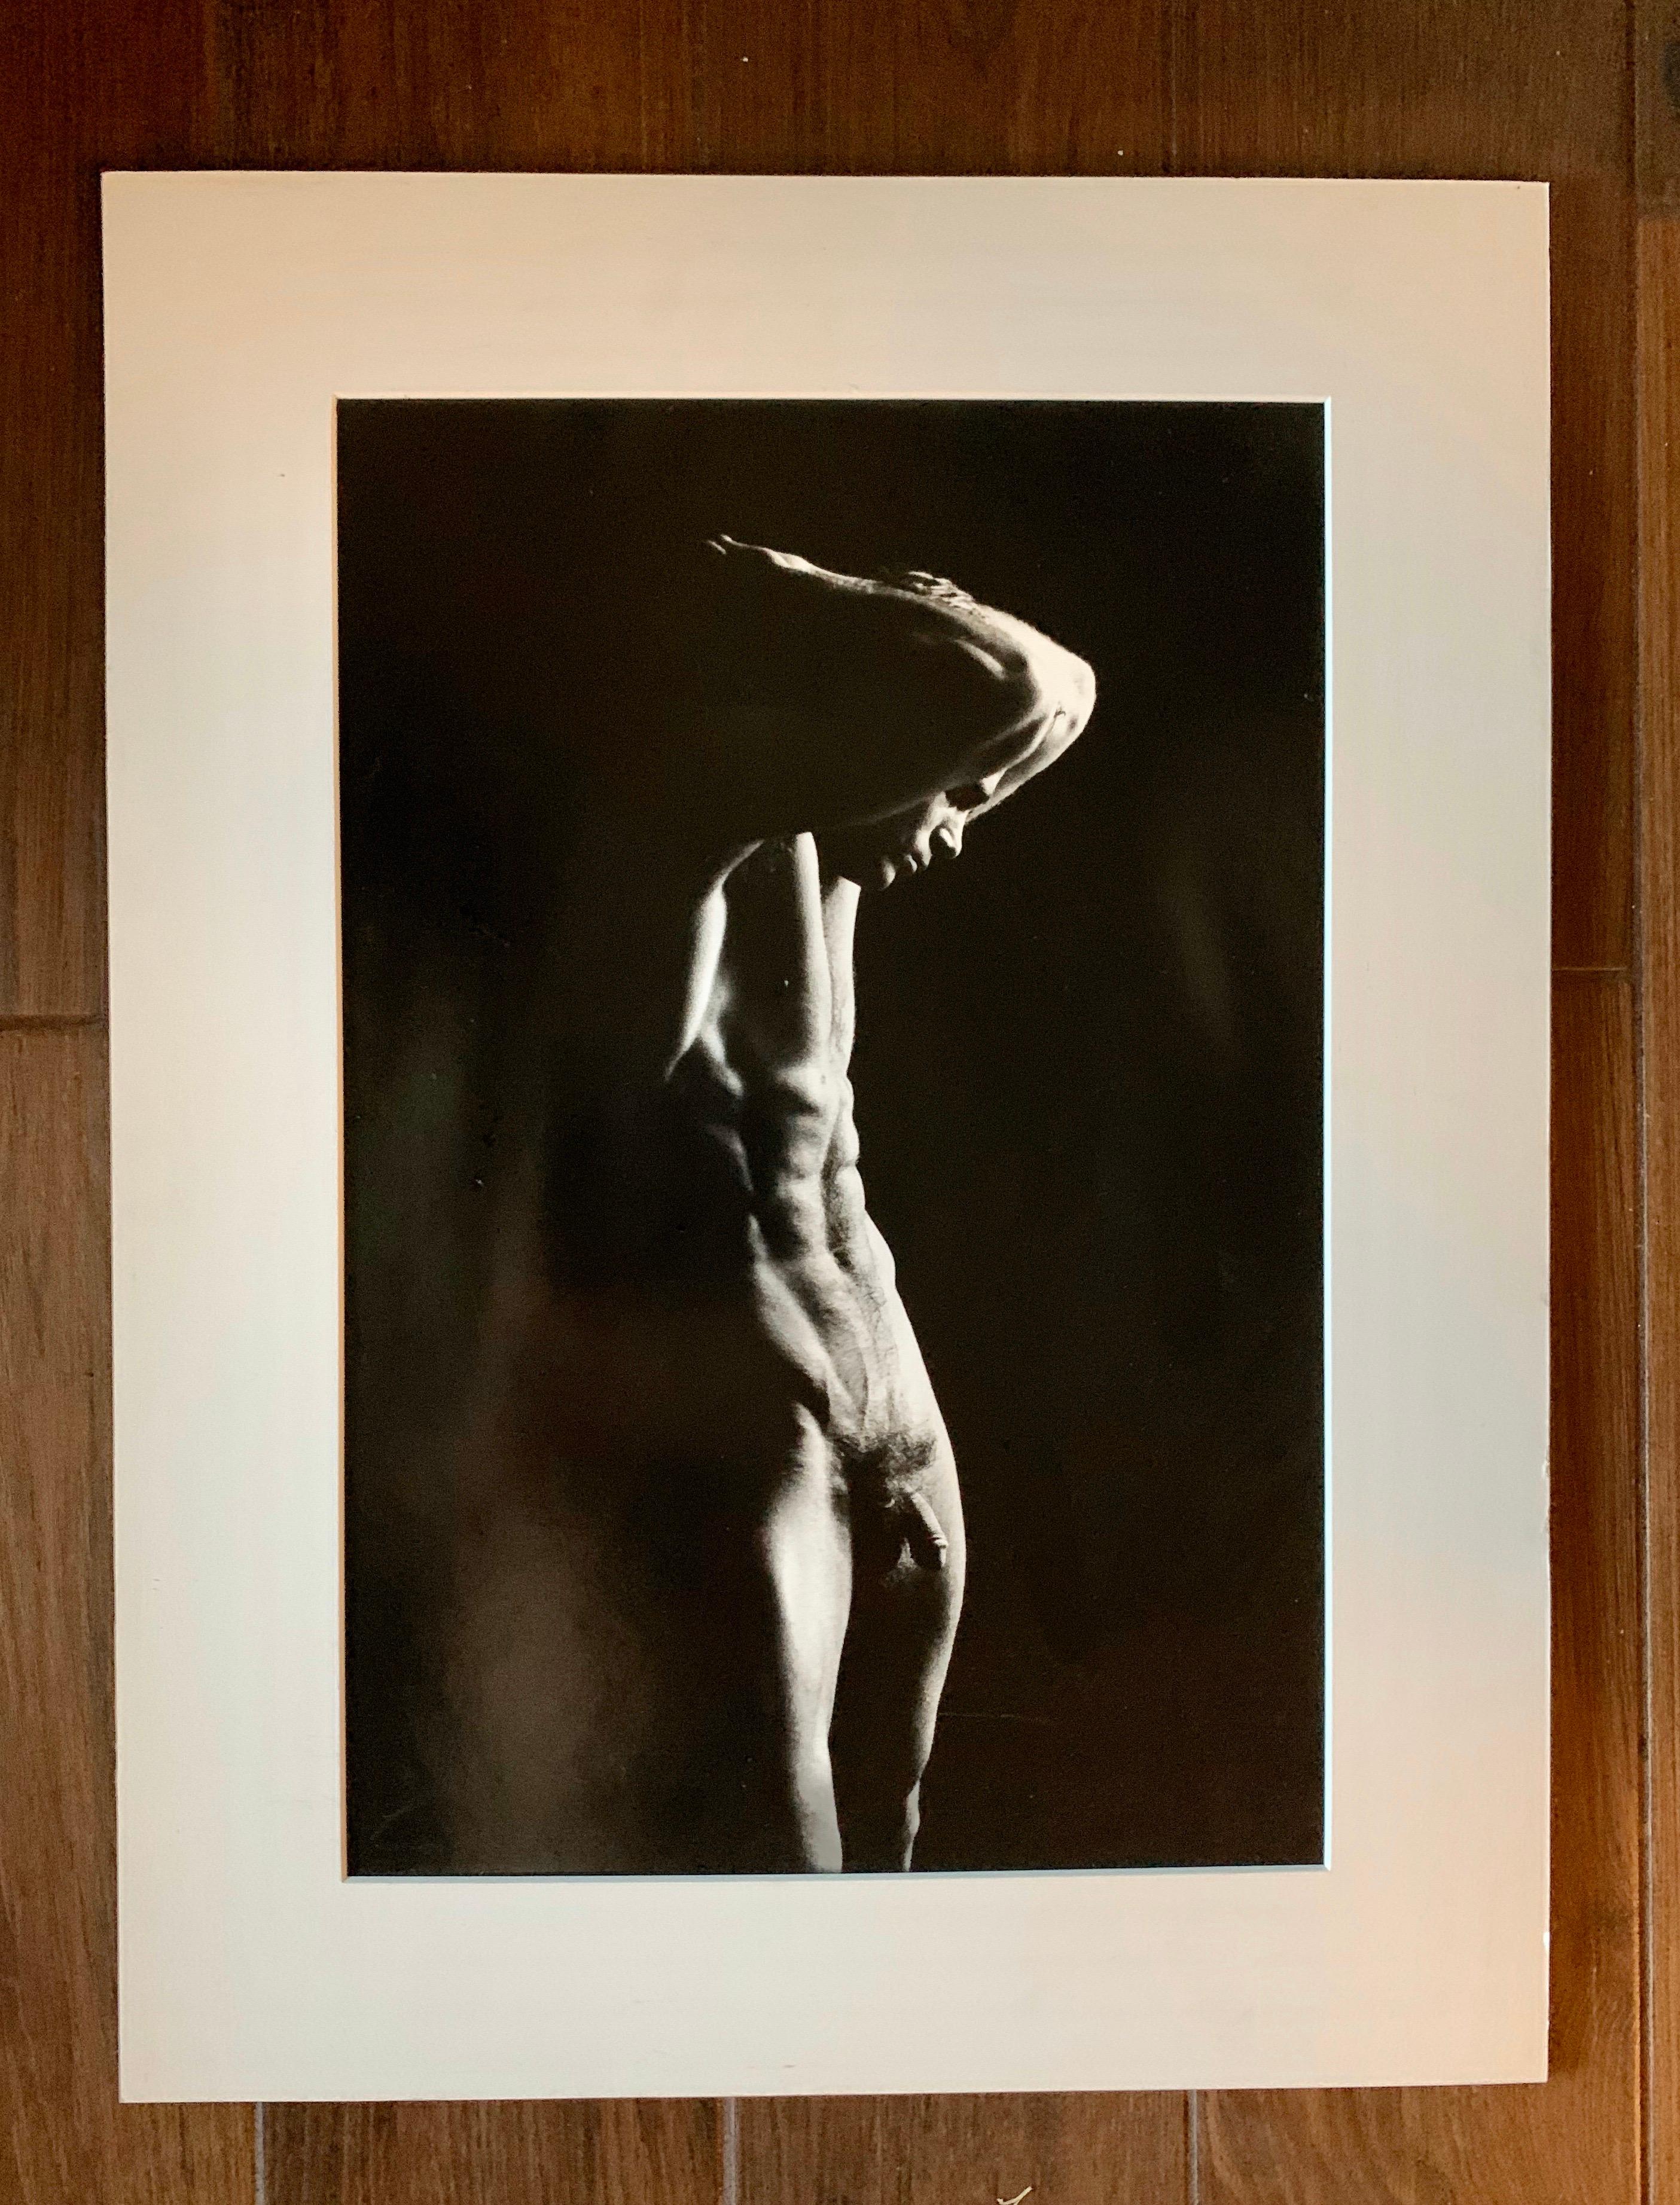 These beautiful original black-and-white photographs acquired in 1989 from the Wessel O’Connor Gallery in New York City. Photographer Alan Bonicatti Photographed 1980s male supermodel (Versace) Scott K. Images are gelatin silver print in size 16 x